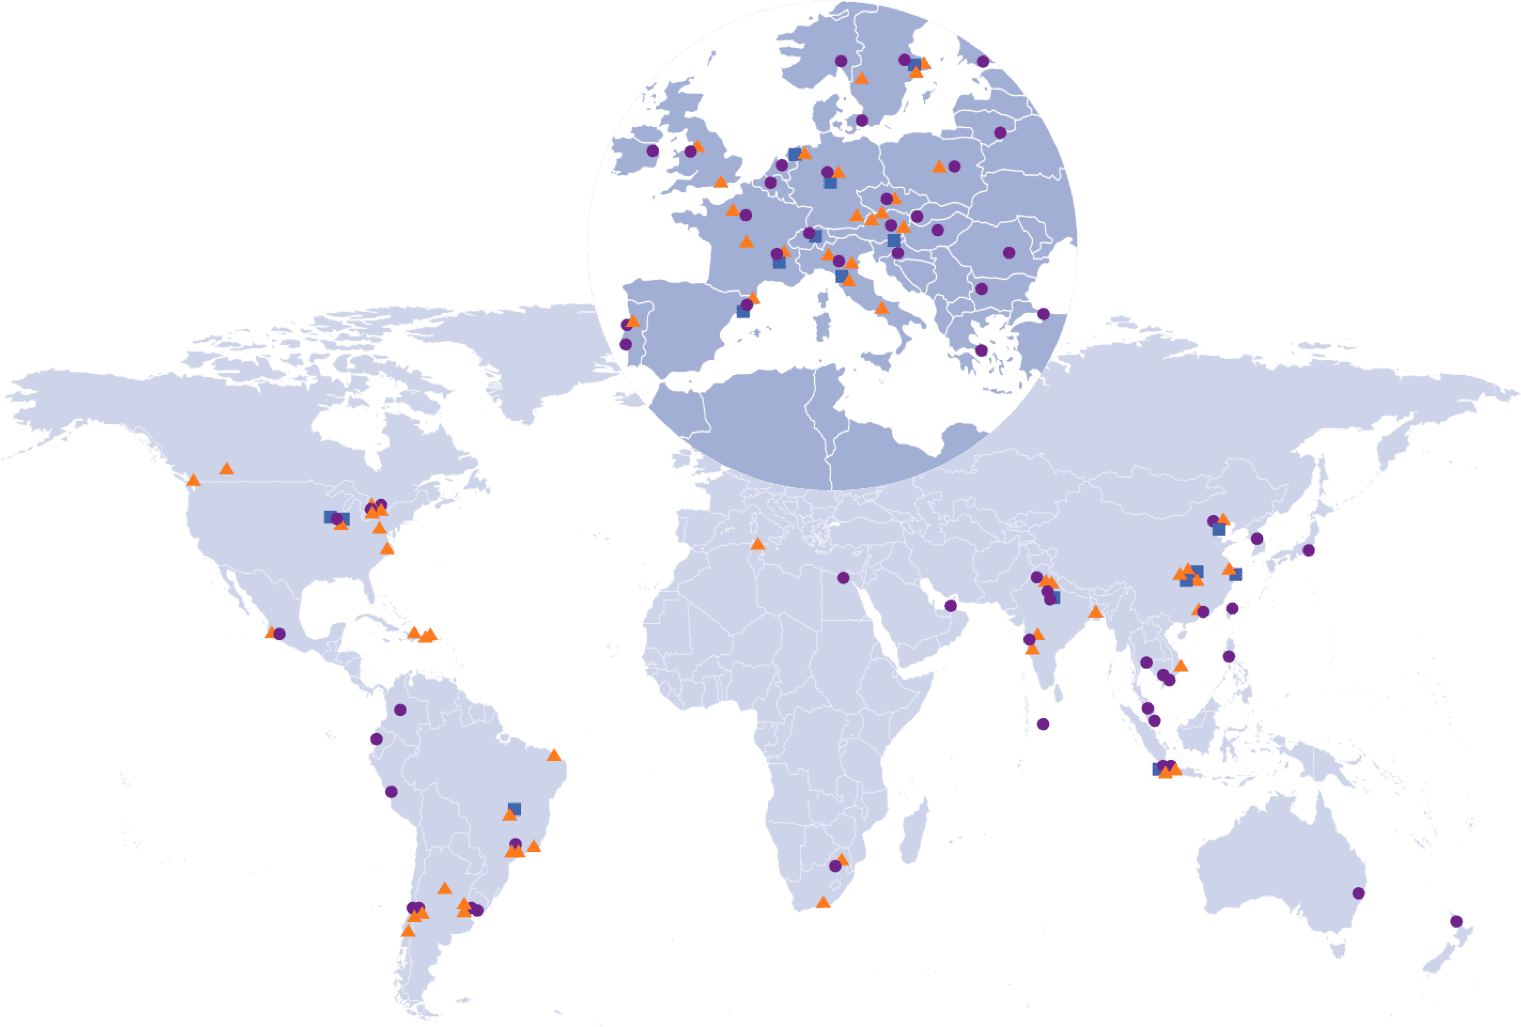 World map with the EU highlighted, showing where Fresenius Kabi manufacturing and distribution facilities are located across the globe